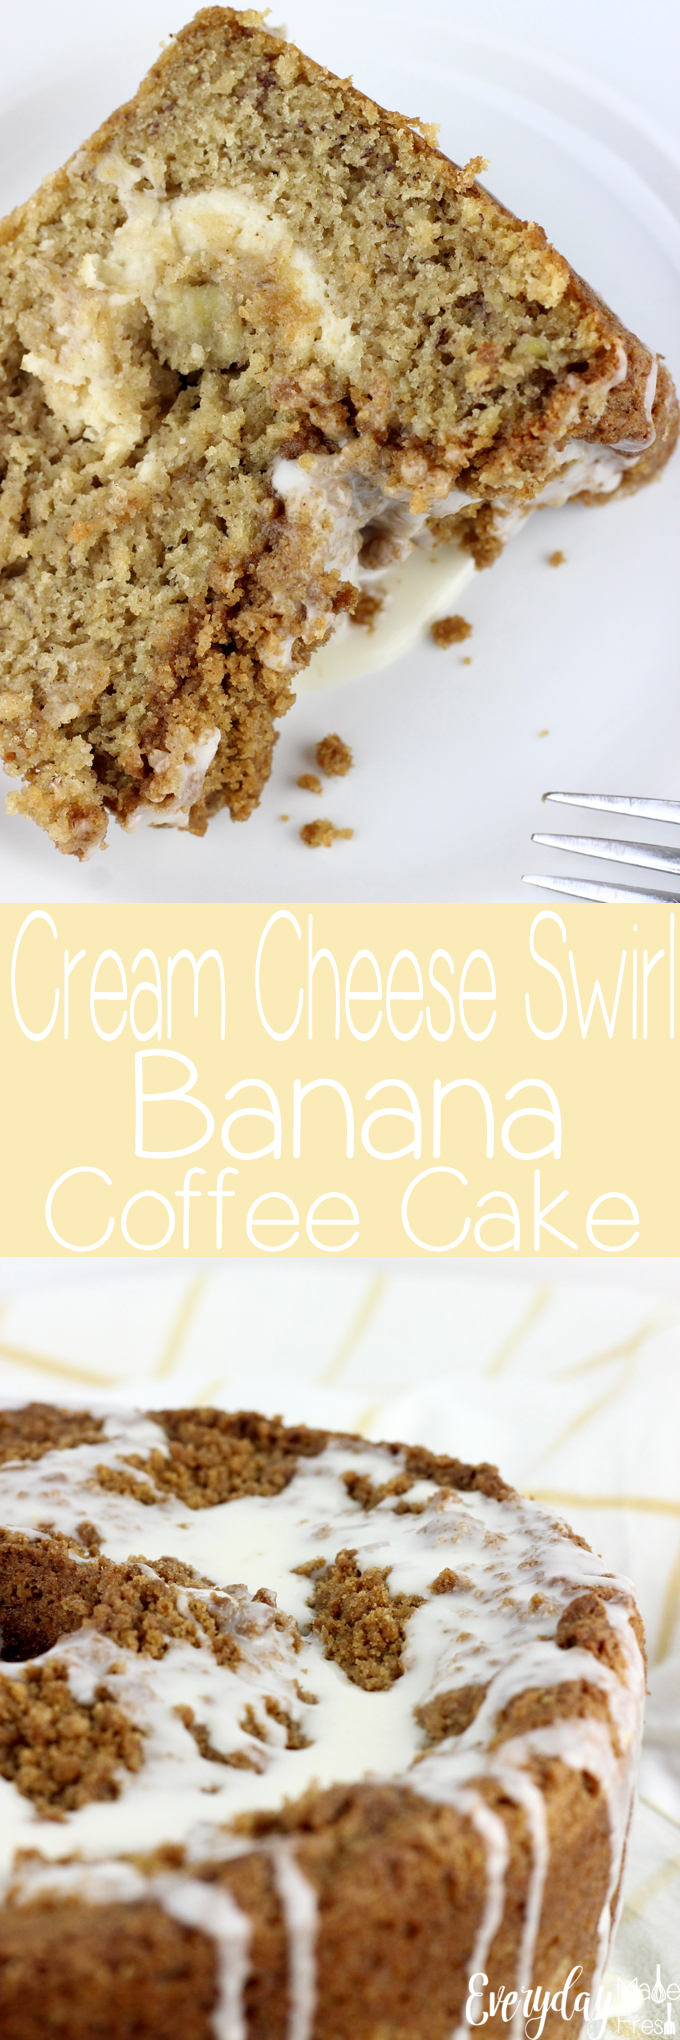 This moist Cream Cheese Swirl Banana Coffee Cake is the perfect way to use up those over ripe bananas. It's topped with a buttery streusel and drizzled with very vanilla drizzle.  | EverydayMadeFresh.com